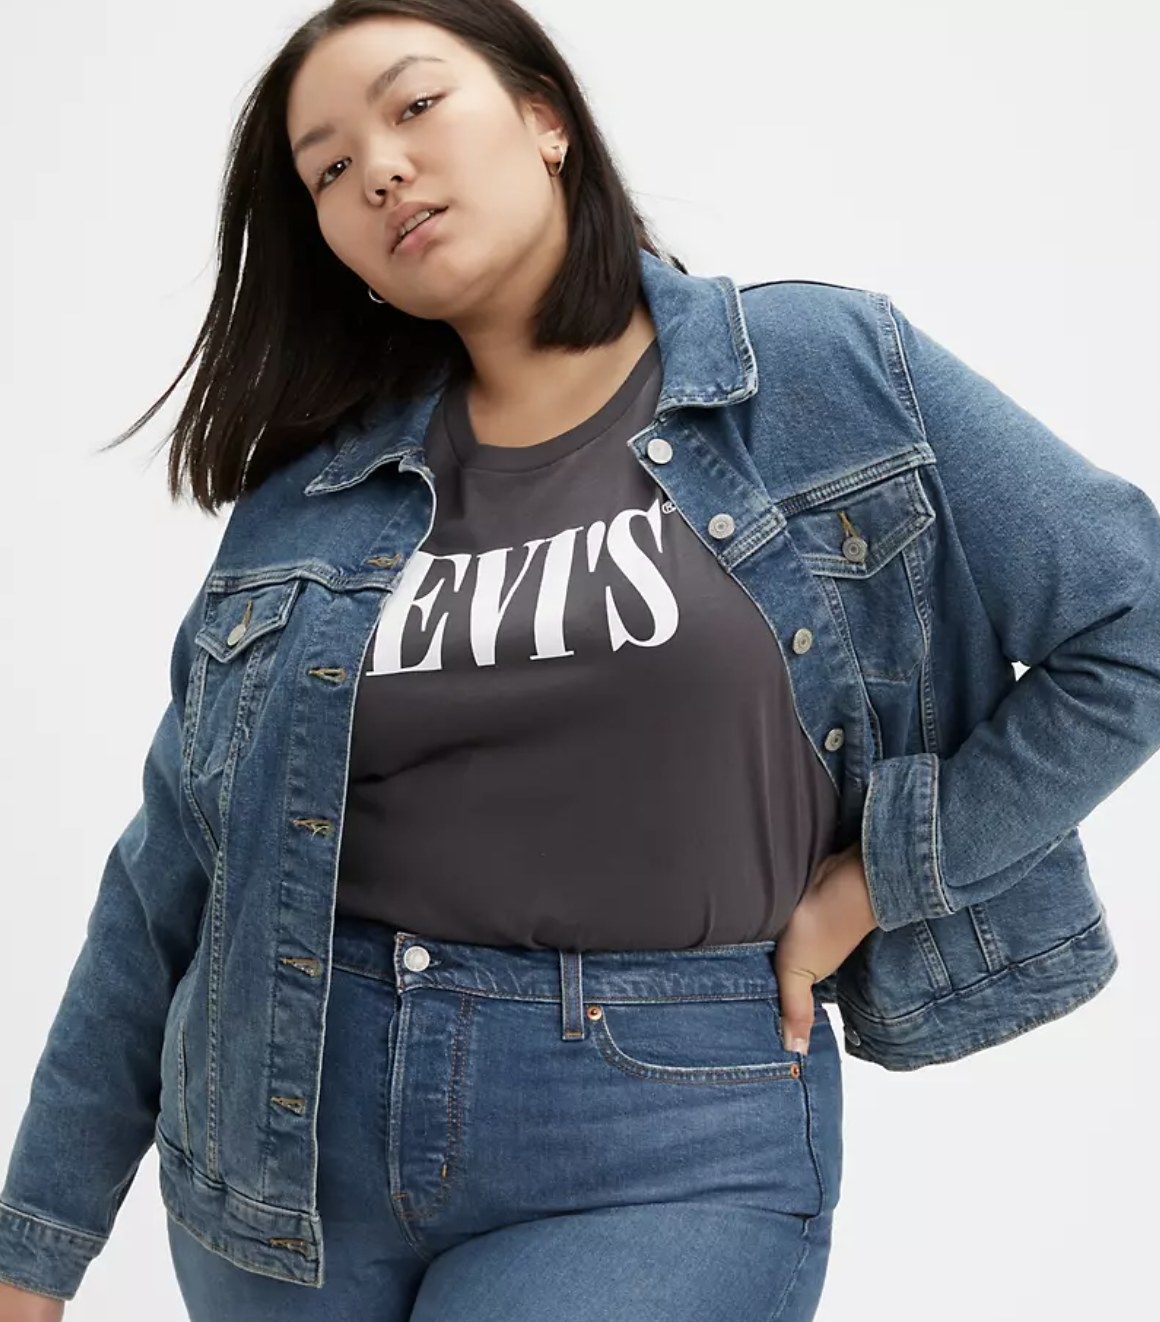 Model is wearing a black shirt with a denim jacket over it and denim jeans